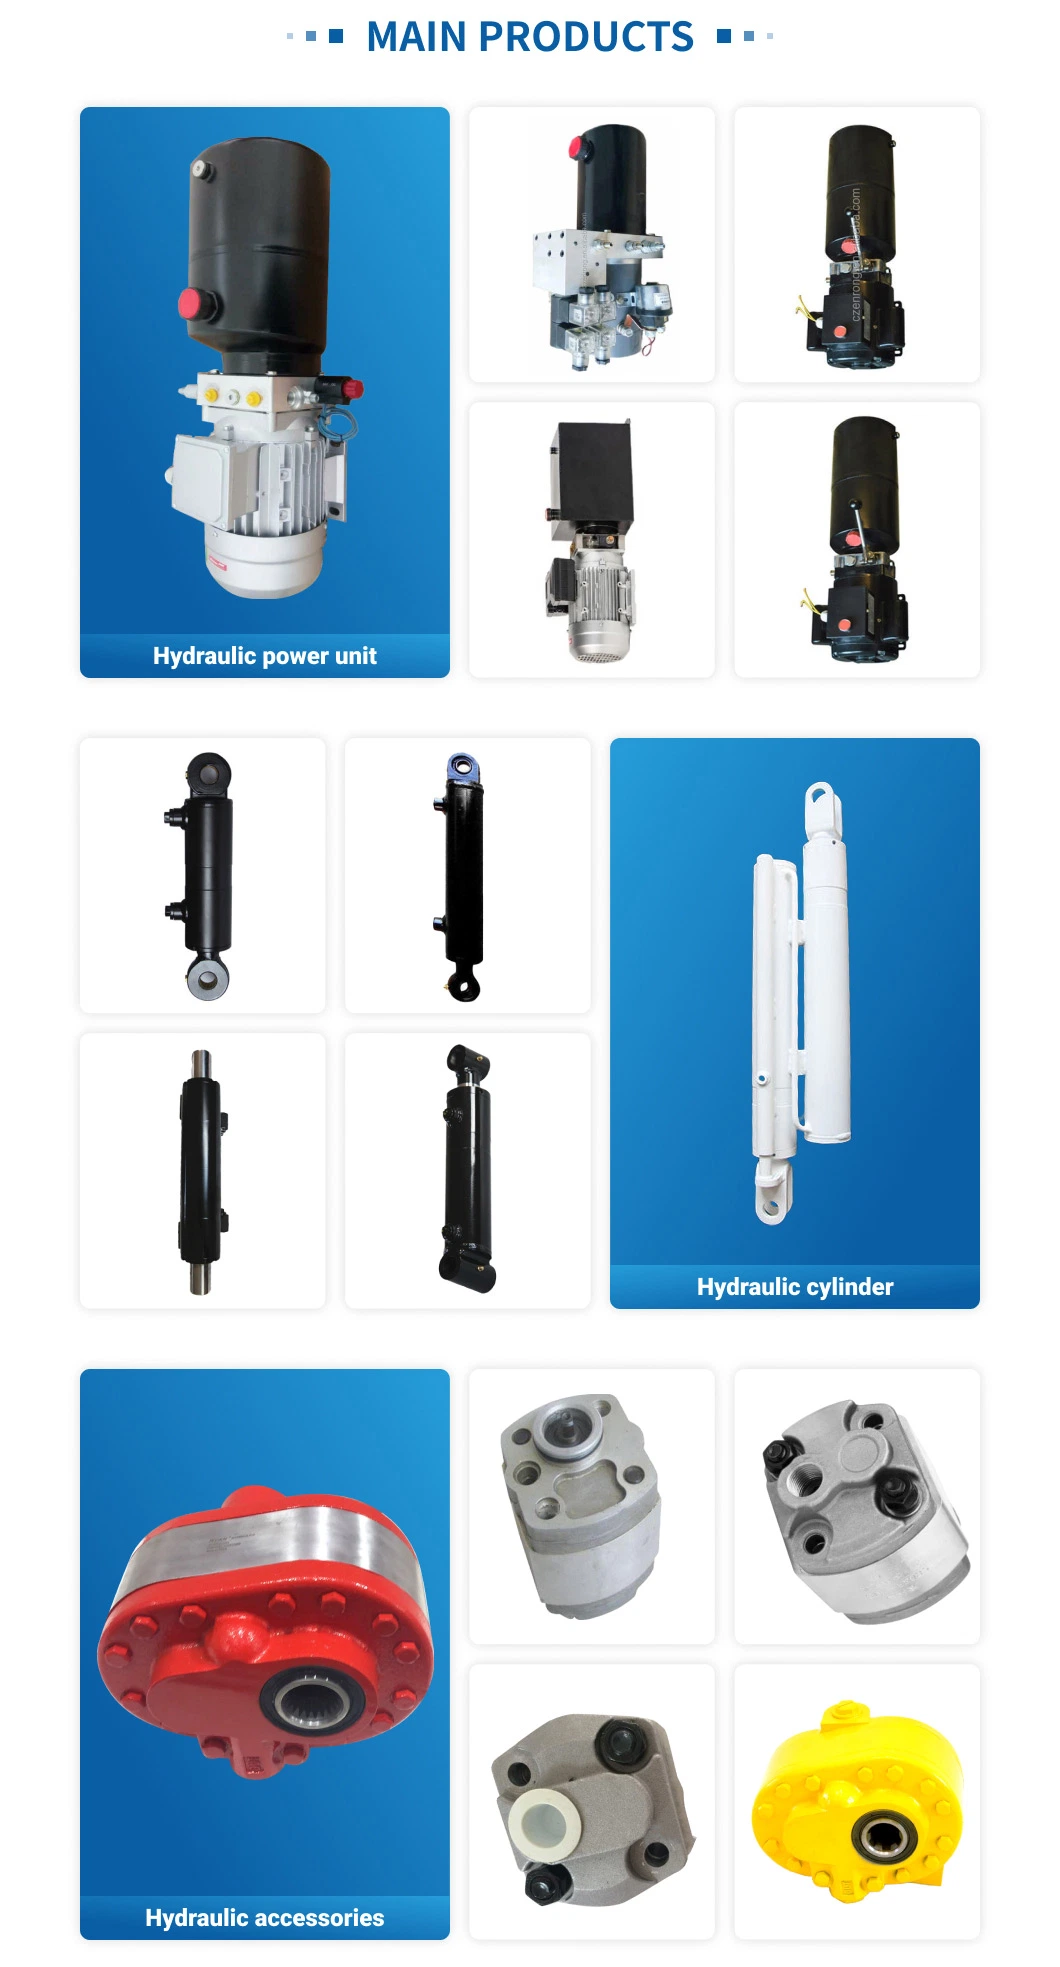 Made in China Hydraulic Power Unit Manual Pump Vehicle Wheelchair Lift Manual Electric Control Hydraulic Unit Wheelchair Lifting System for Disabled People